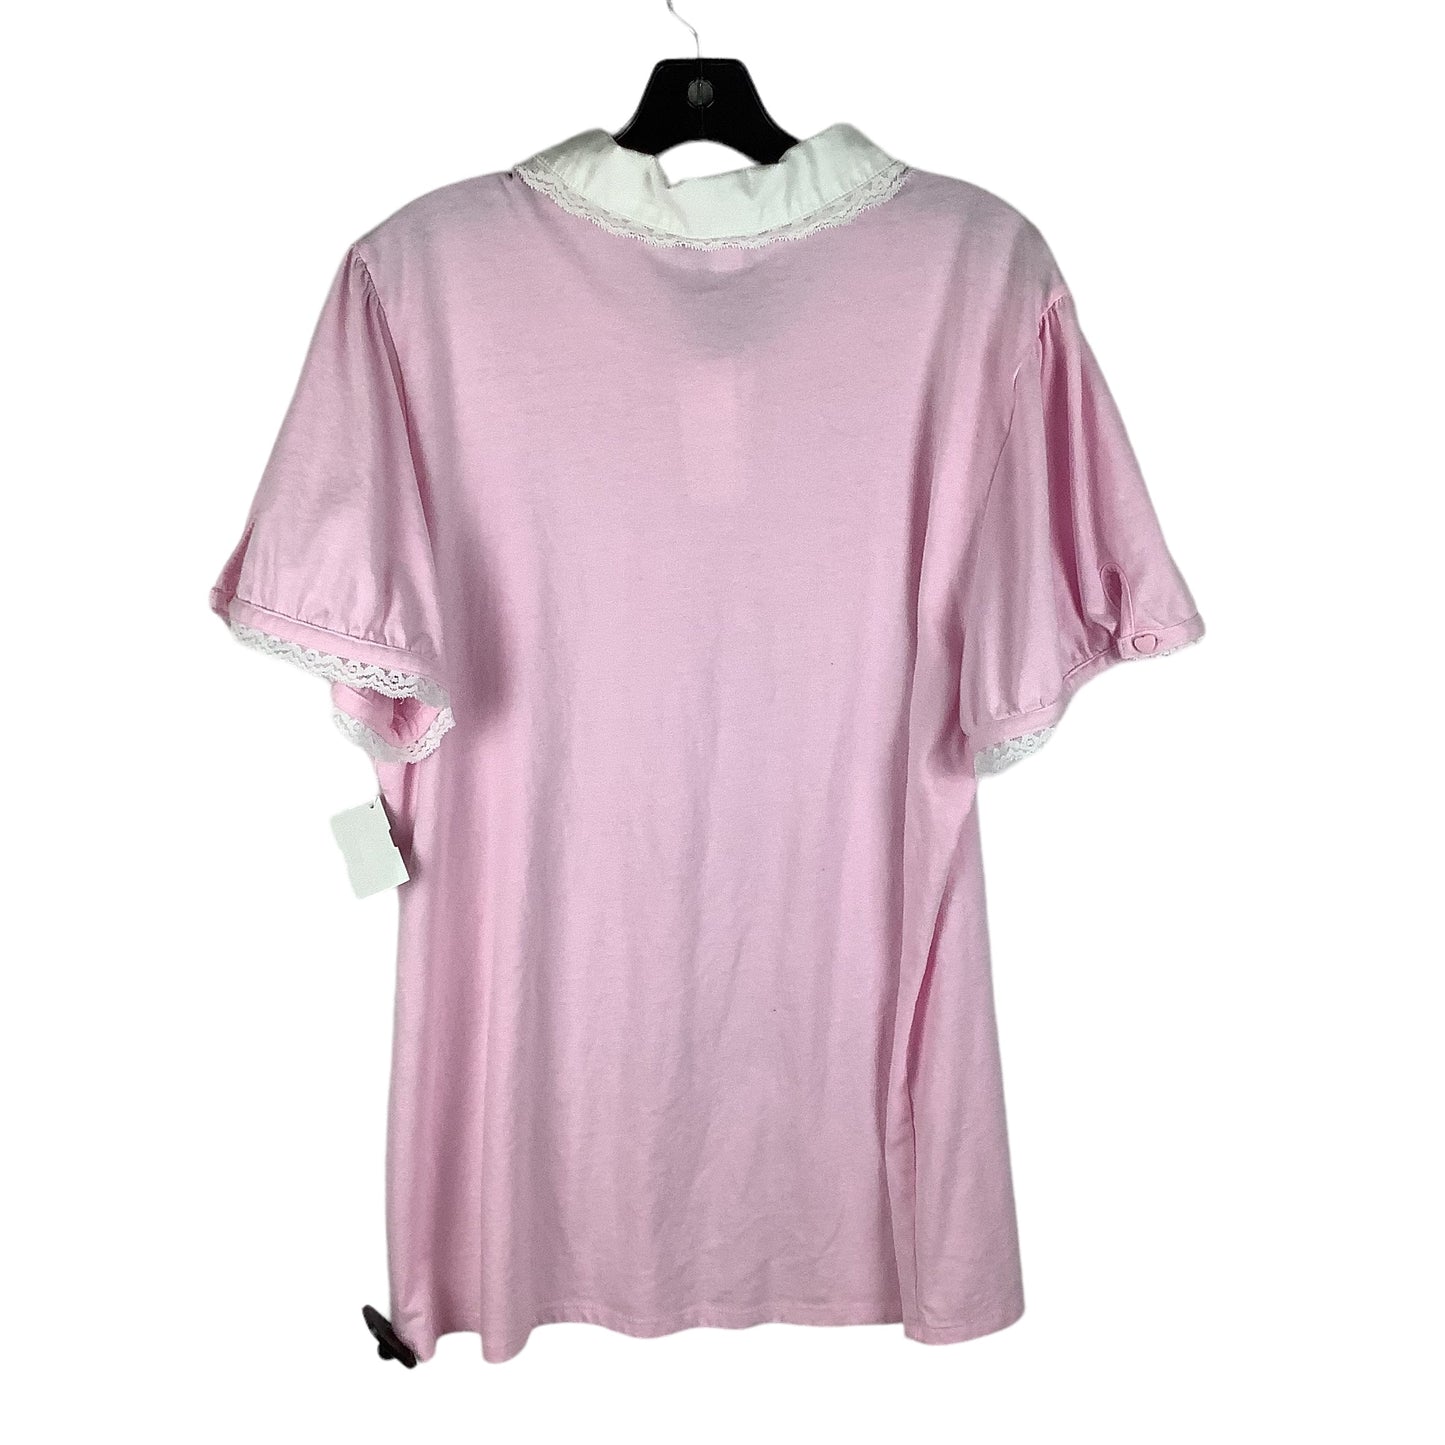 Pink Top Short Sleeve Clothes Mentor, Size 2x